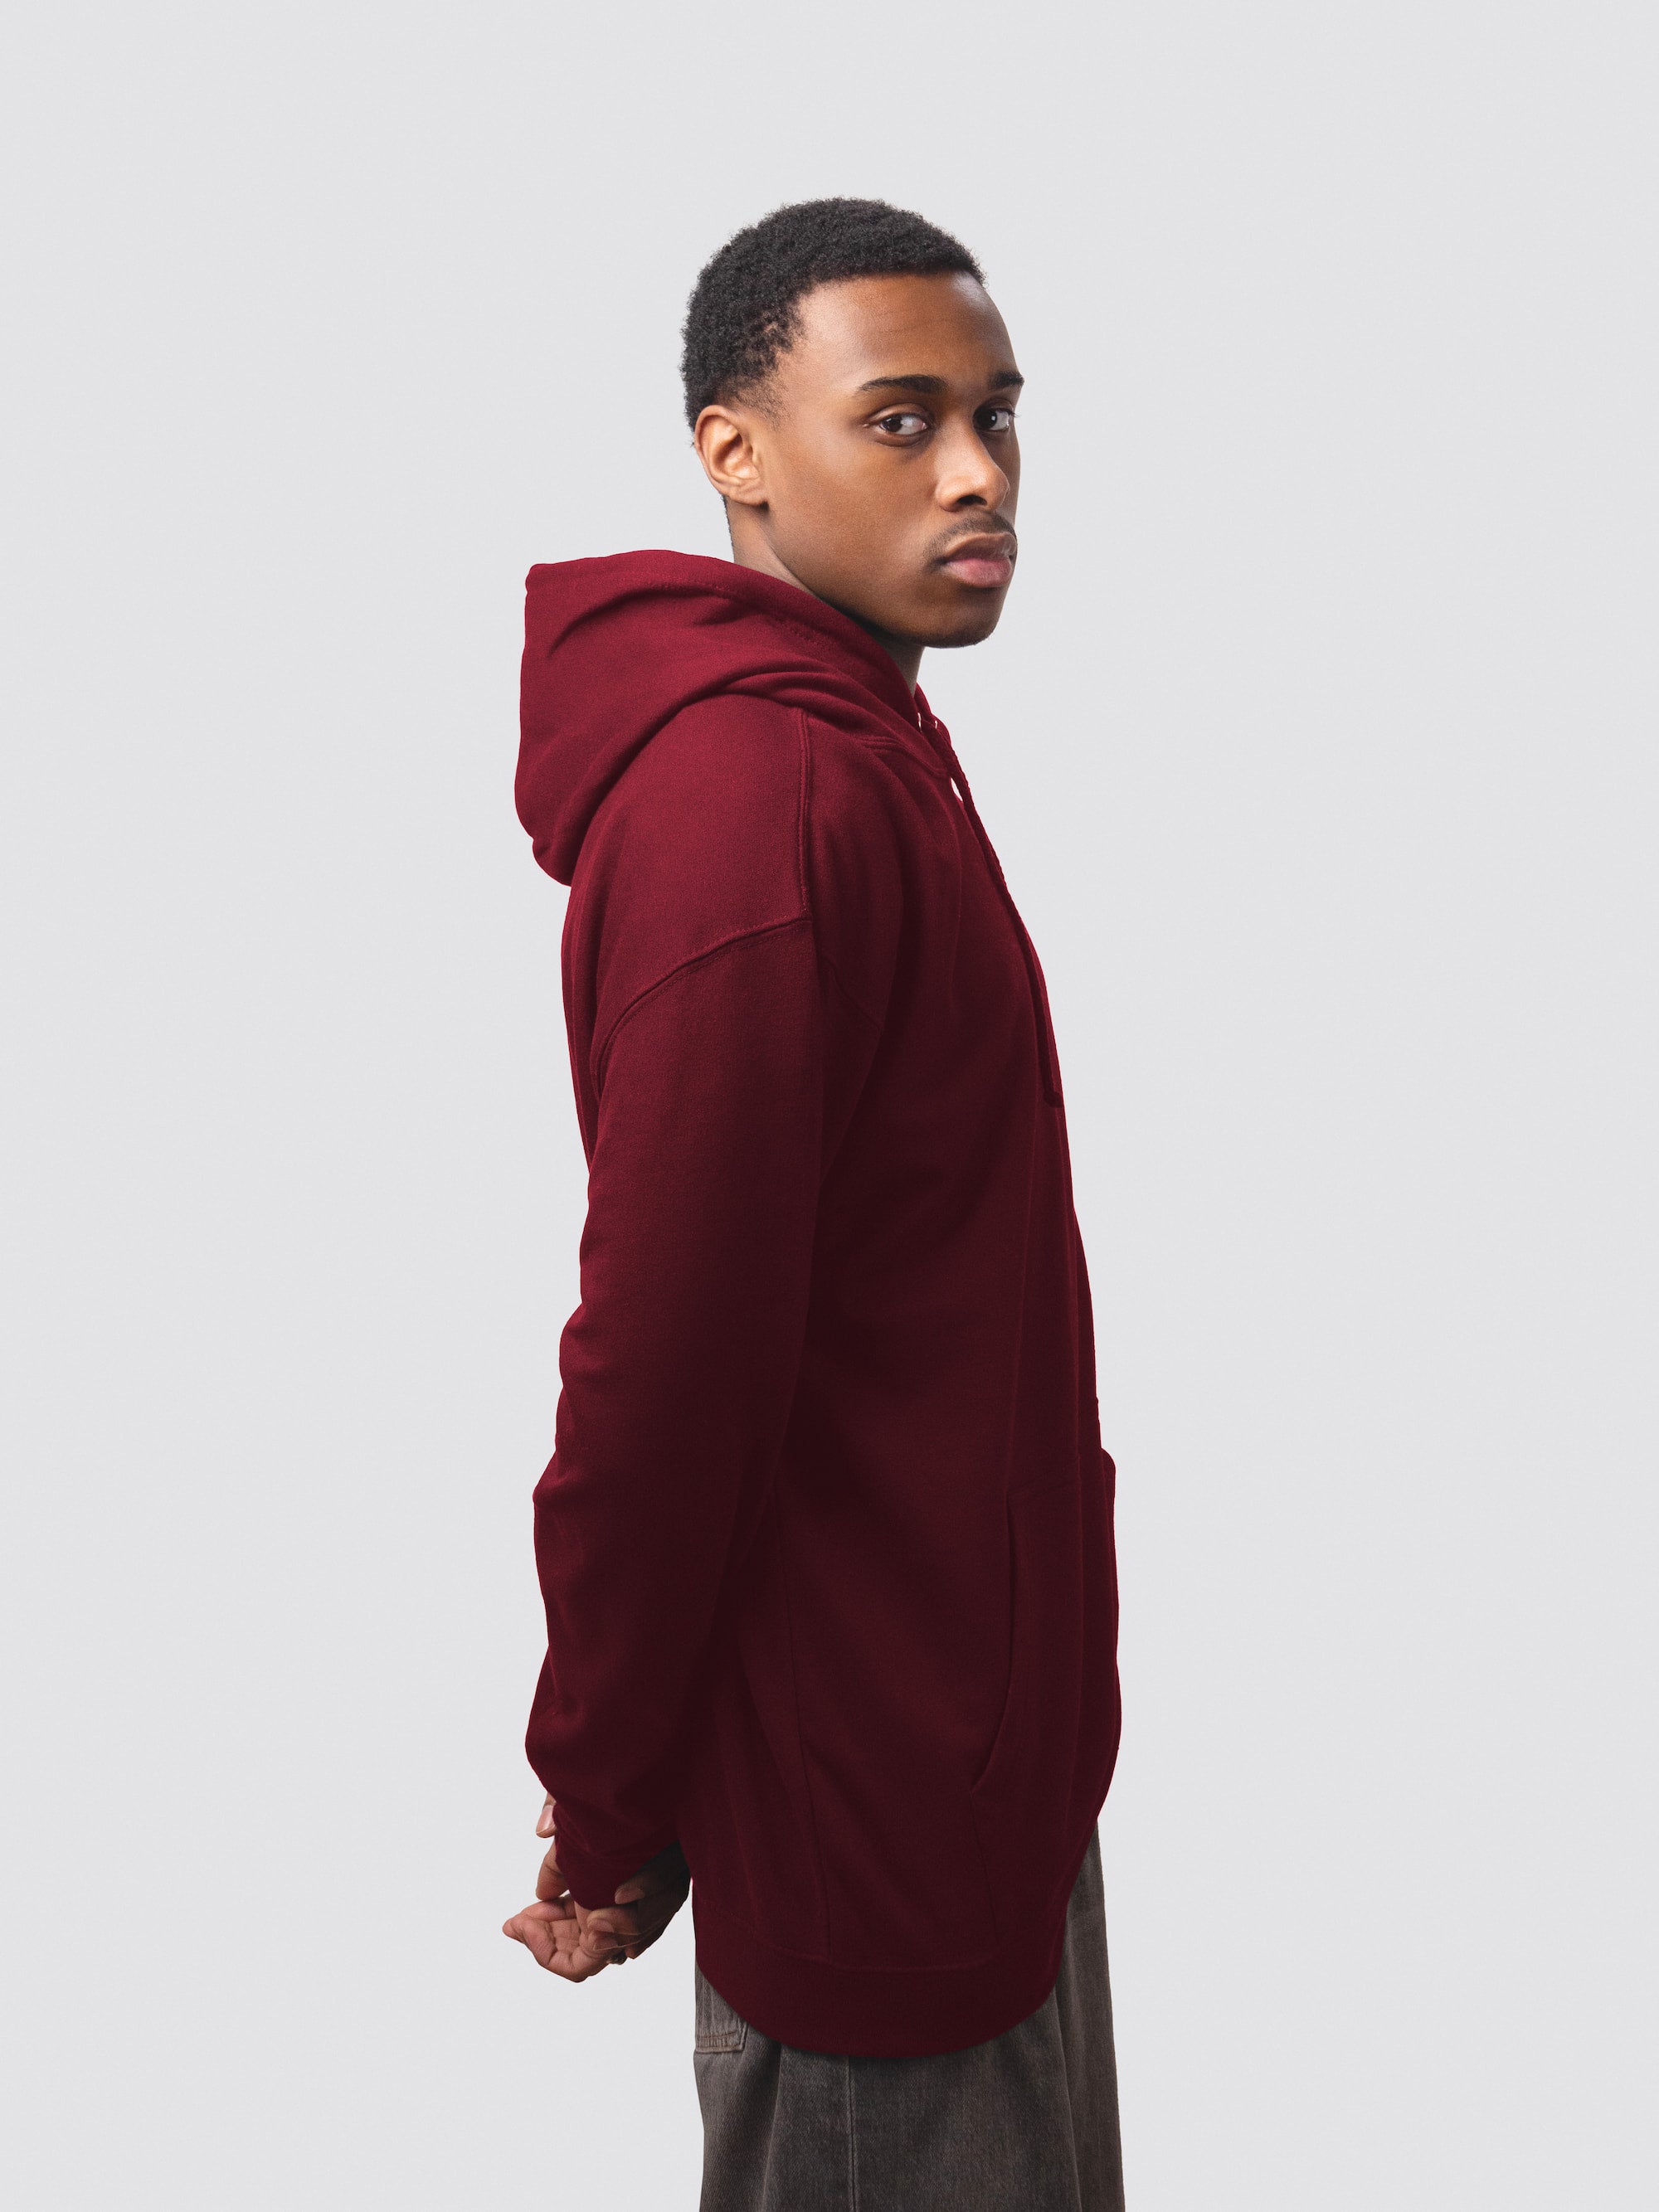 Lucy Cavendish College hoodie, made from burgundy cotton-faced fabric